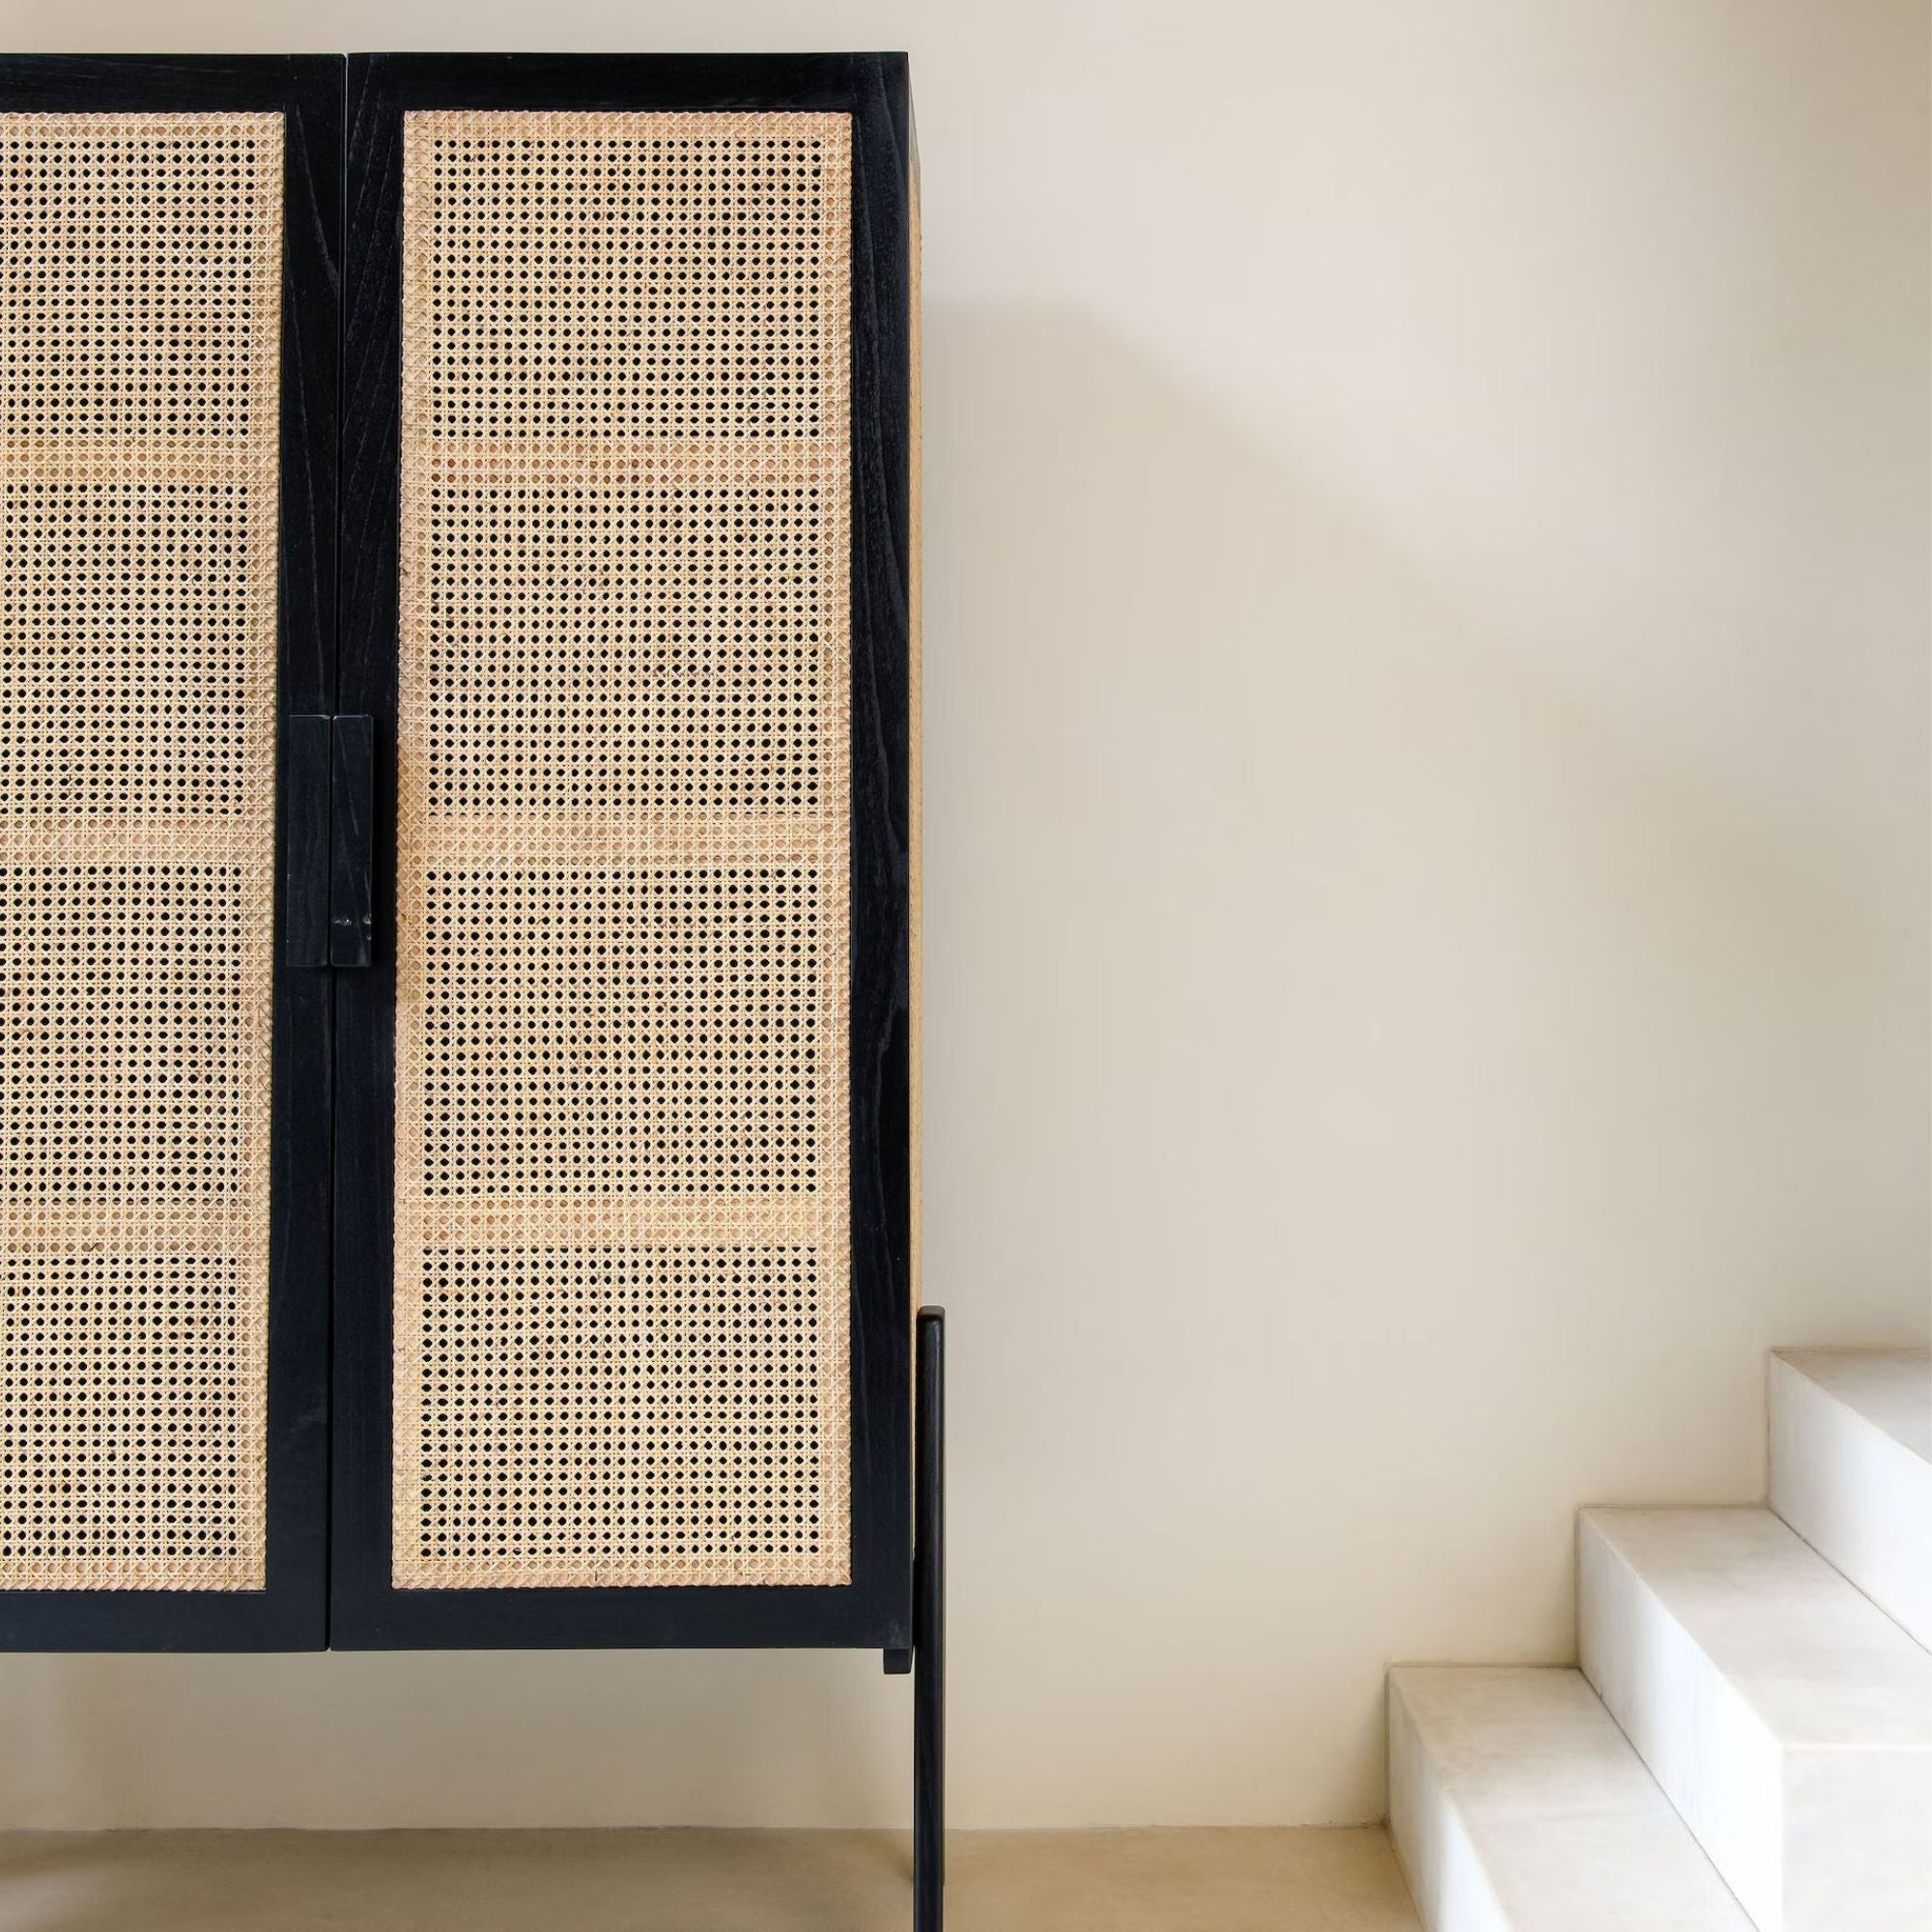 Rattan Storage Cabinet - THAT COOL LIVING